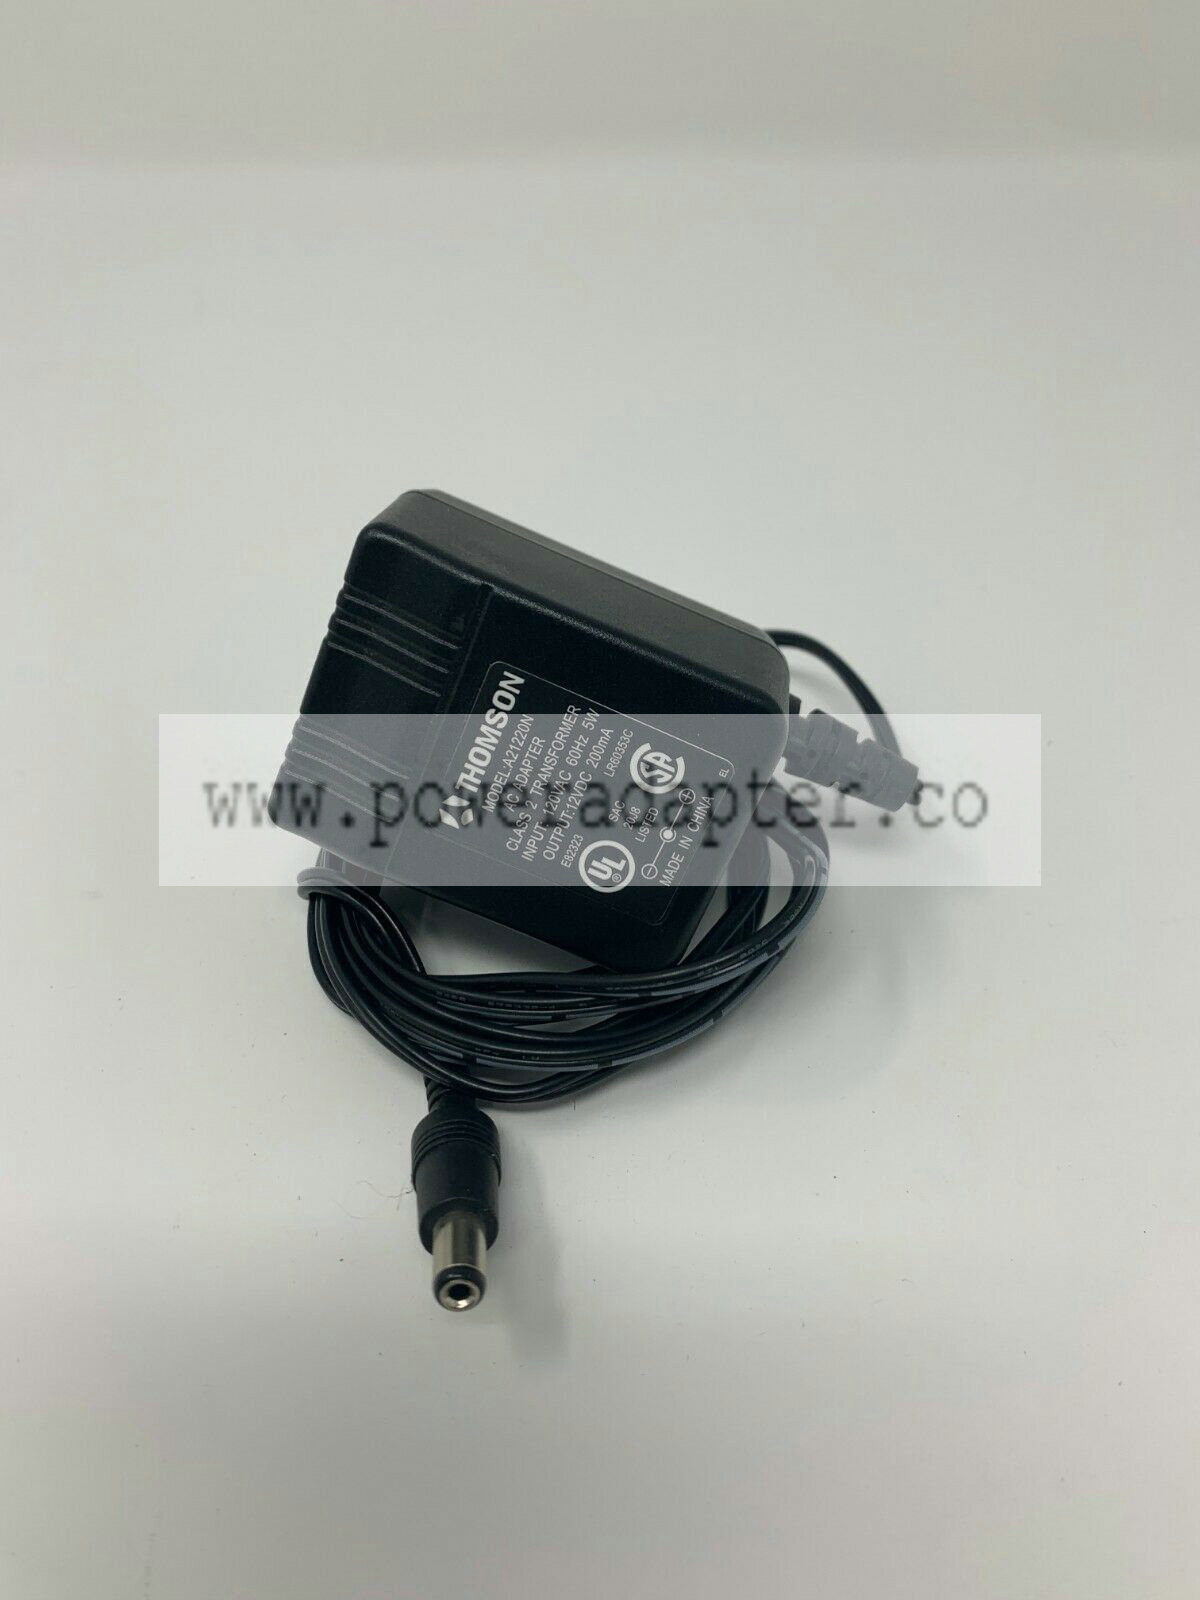 THOMSON Model A21220N AC Adapter Class 2 Transformer 120VDC 200mA Thompson Brand: Thomson Condition: This item is in